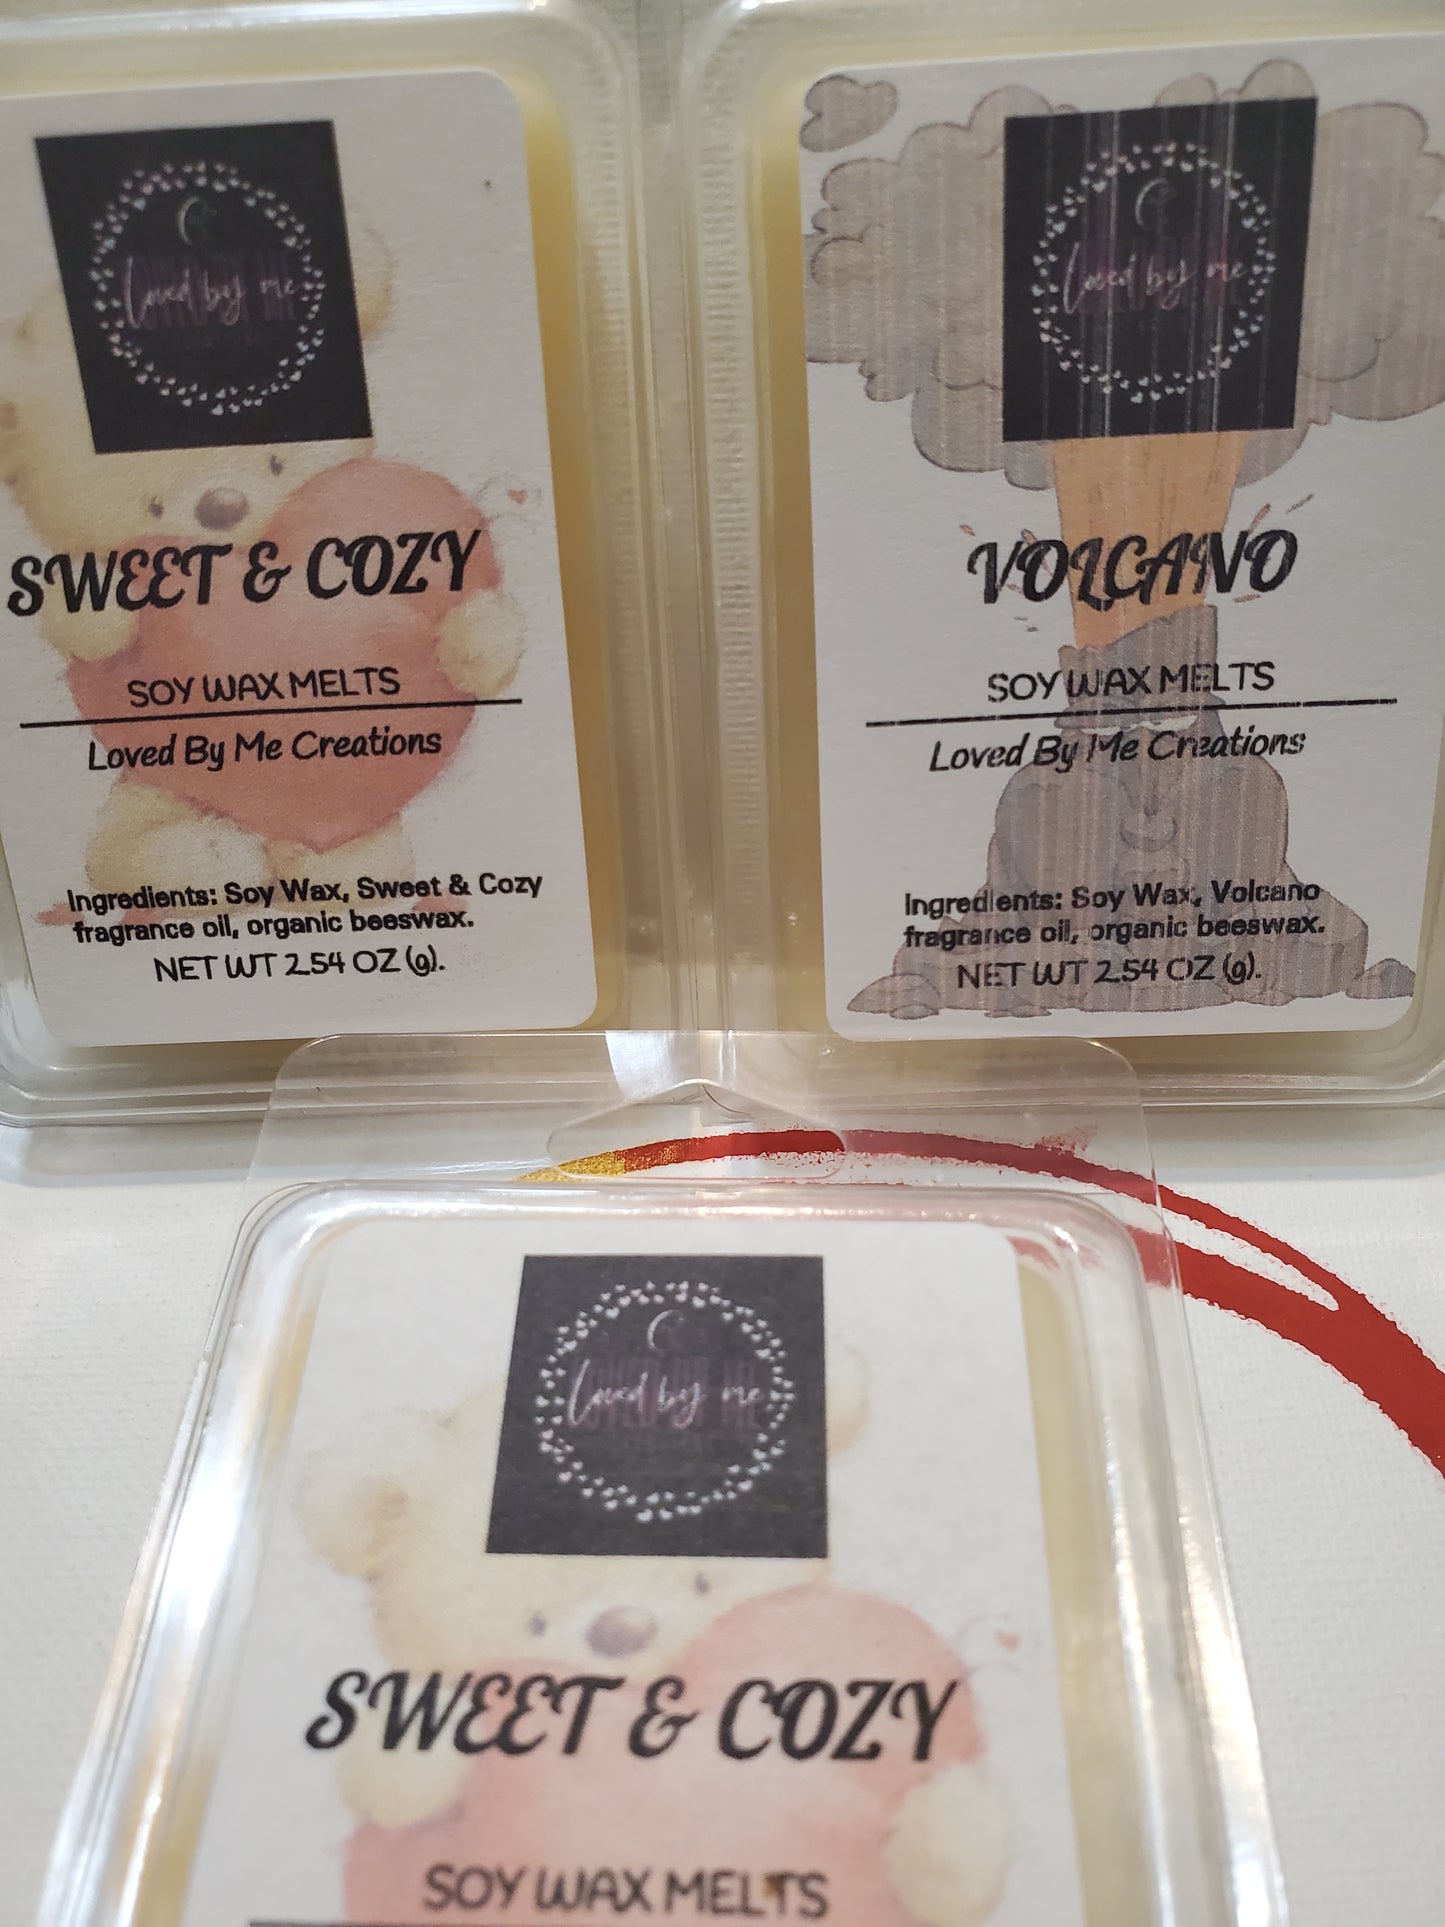 Long-Lasting scent wax melts for your home or office. Made with soy wax for a clean burn. Pour back in the mold container to store and reuse until the scent is gone. Select one scent per wax melt Handmade Soy Wax Melts | Loved By Me Creations Visit Now: www.lovedbymecreations.com